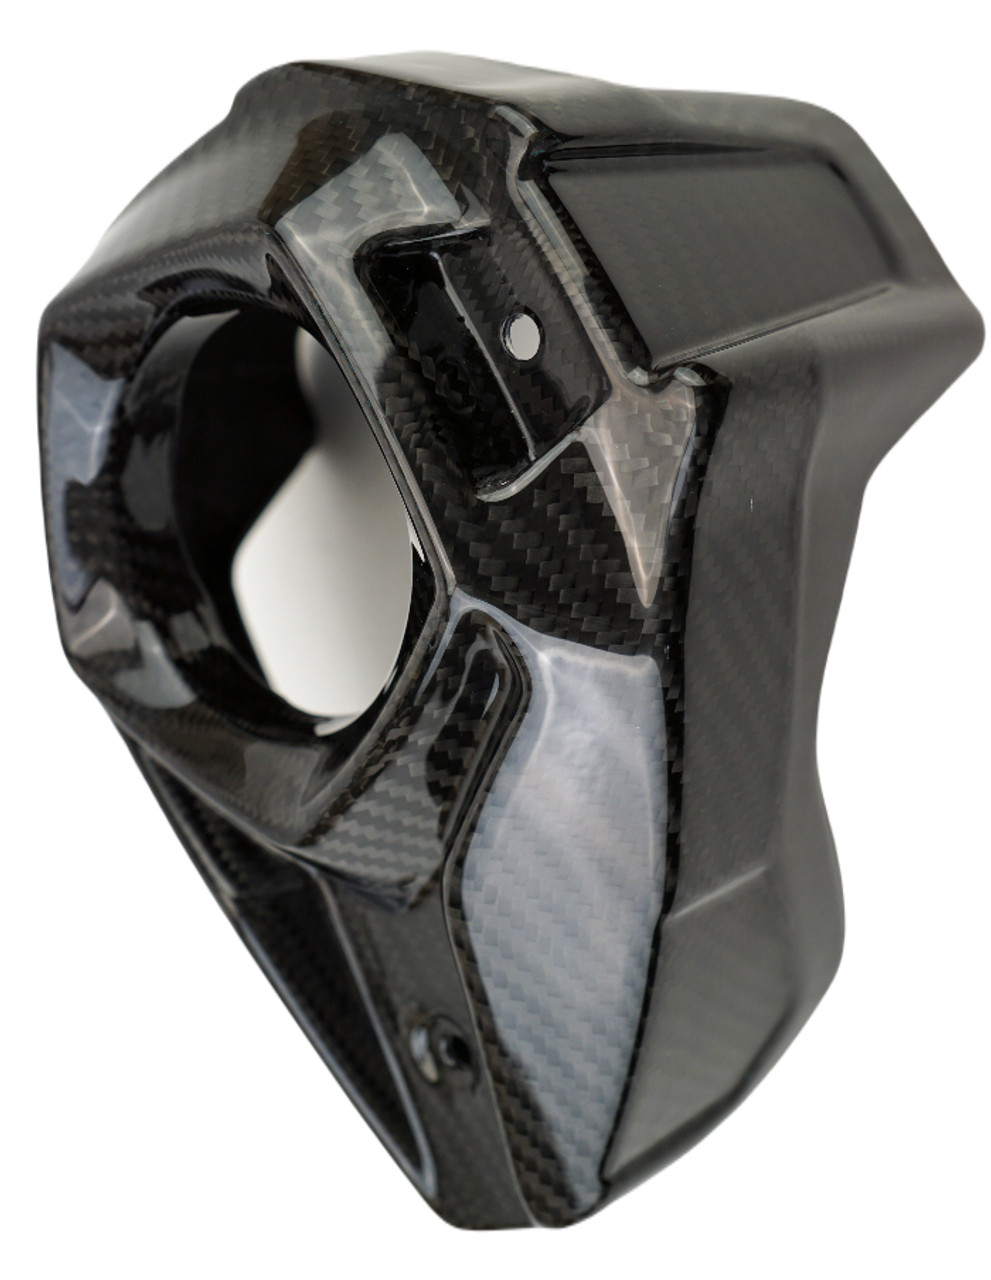 Exhaust Cap in Glossy Twill Weave Carbon Fiber for Kawasaki Z H2

